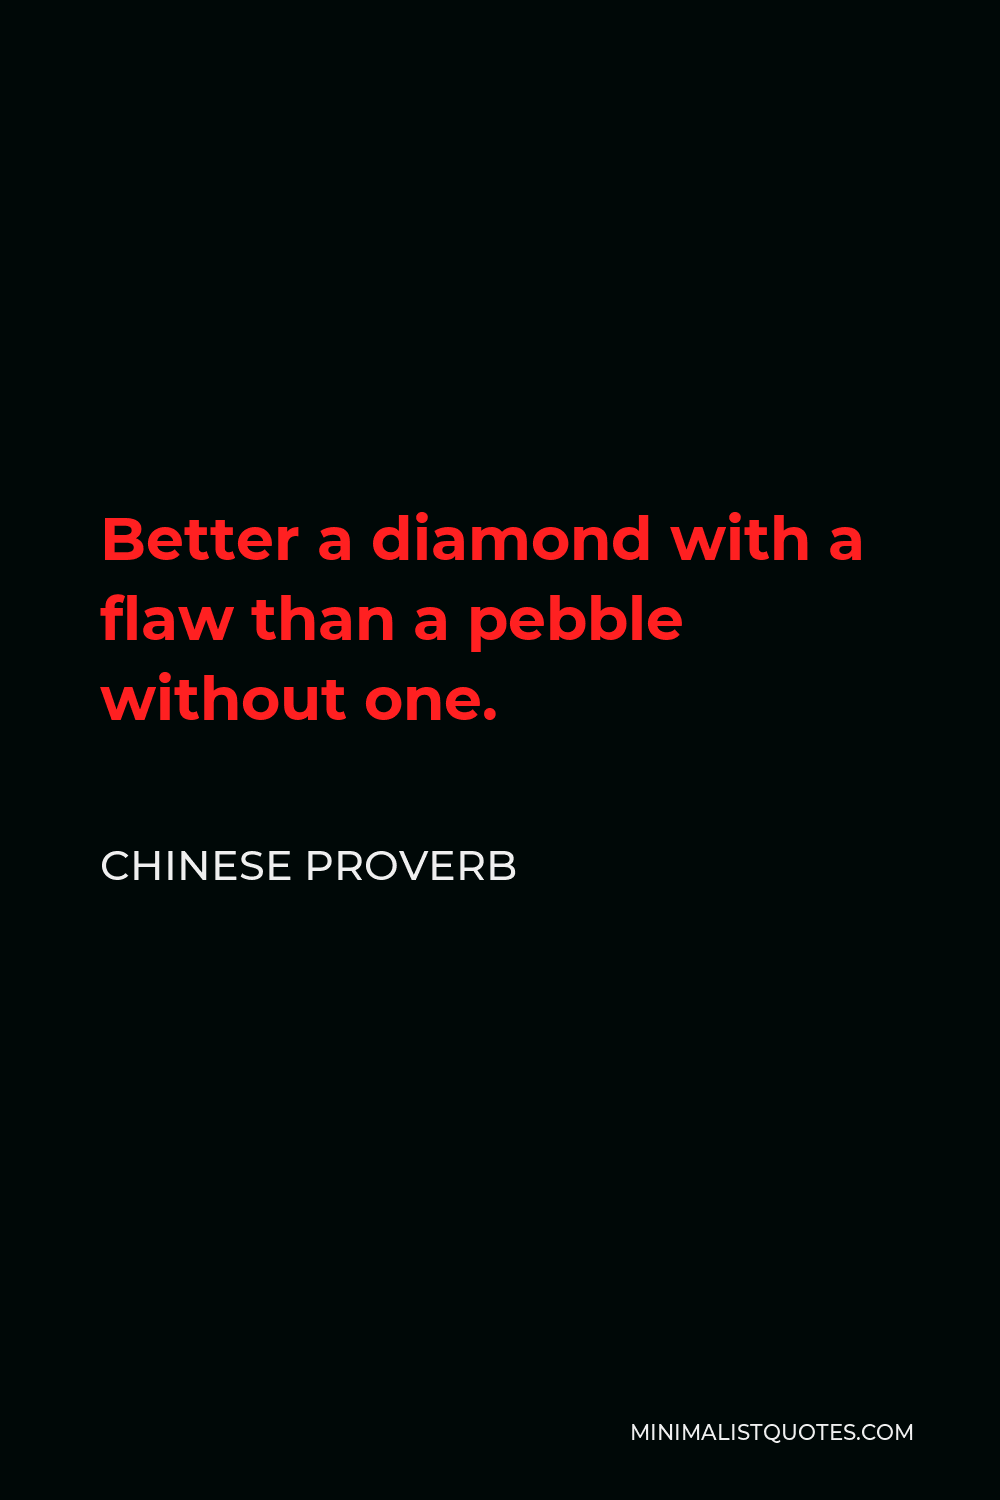 Chinese Proverb Quote - Better a diamond with a flaw than a pebble without one.